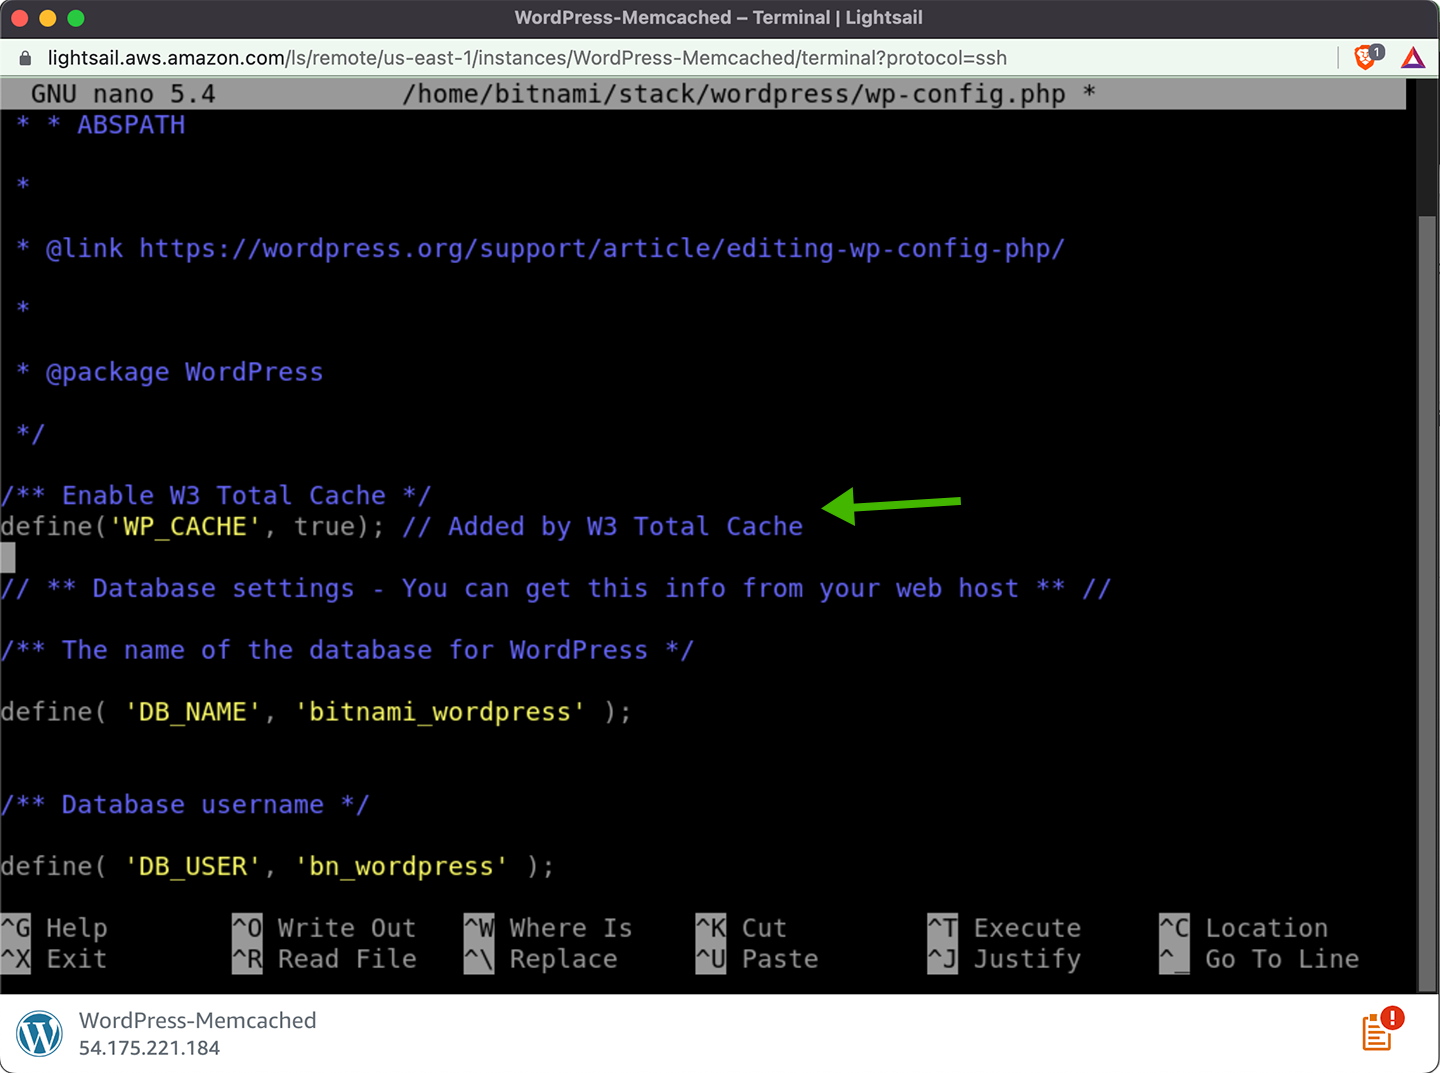 Screenshot of the Lightsail in-browser terminal showing wp-config.php with W3 Total Cache configuration